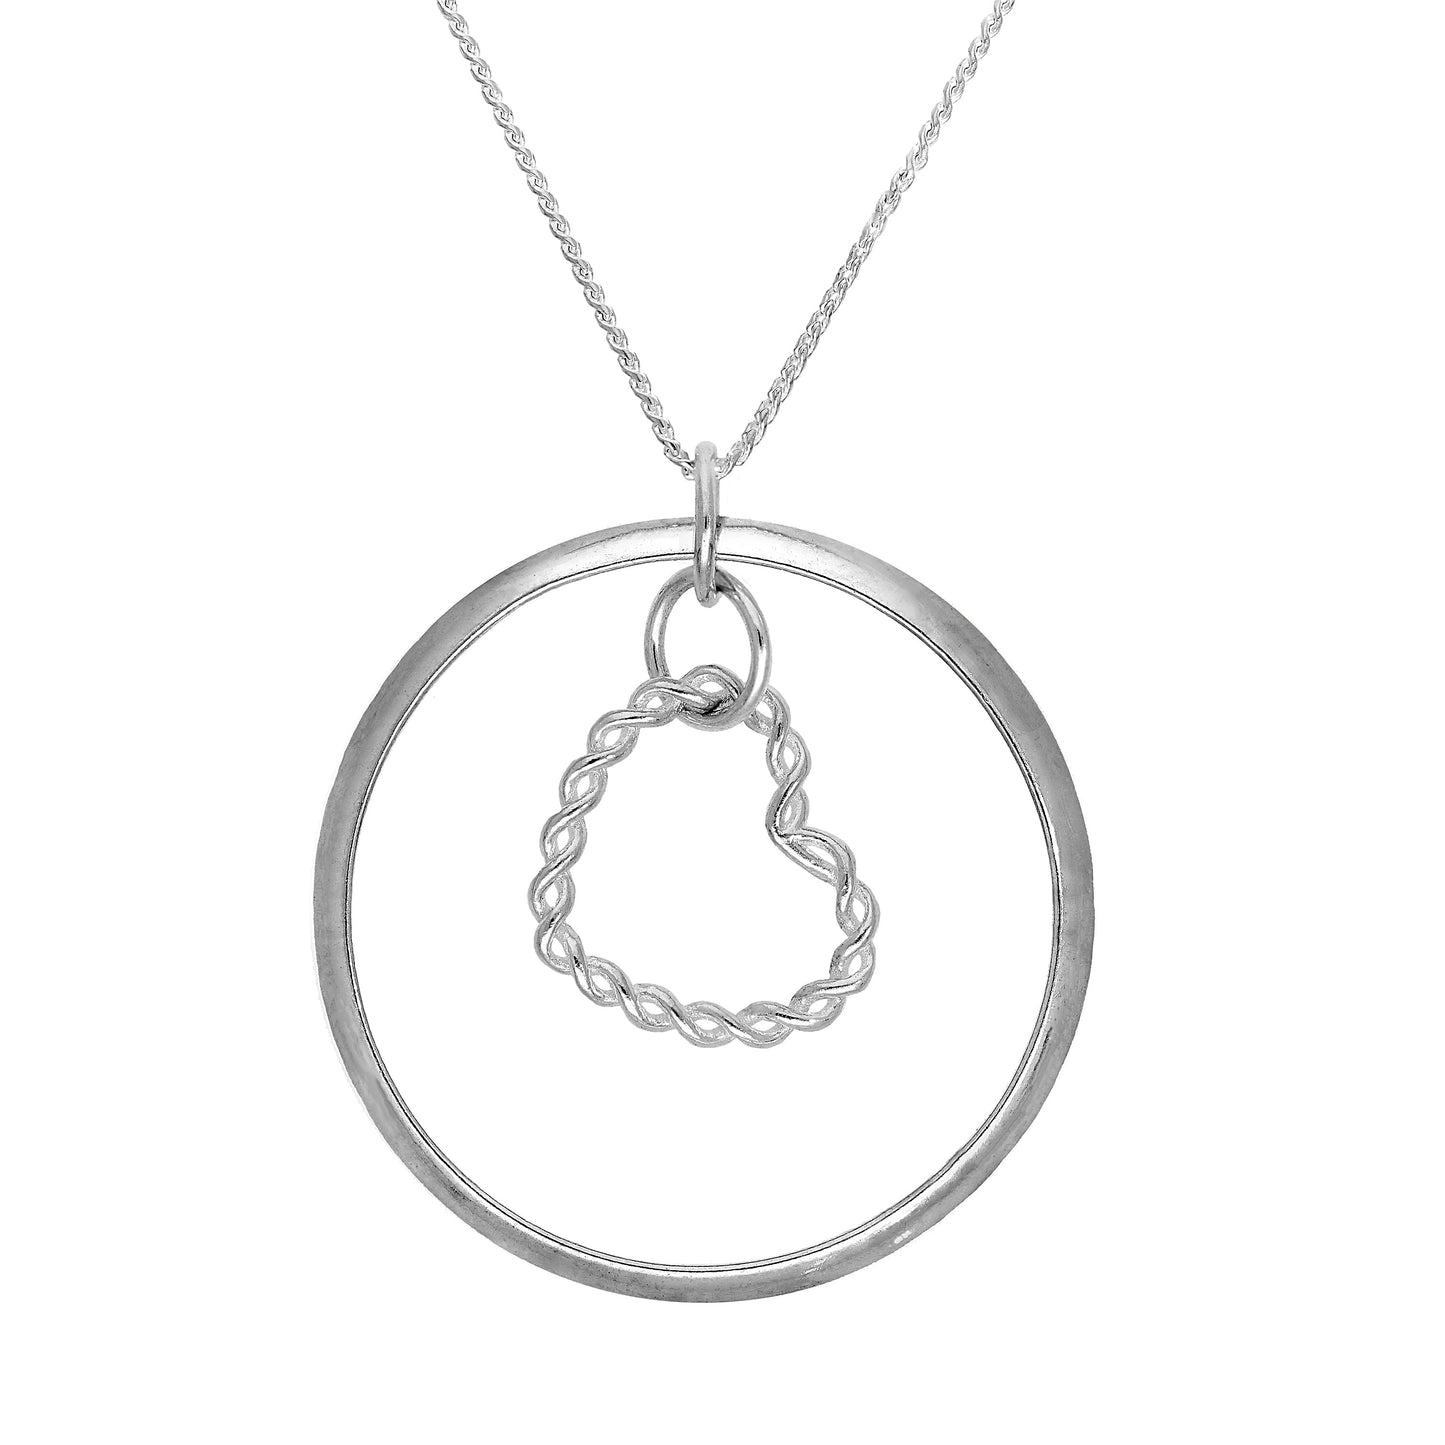 Sterling Silver Karma Moments Twisted Heart Pendant on Foxtail Chain Necklace